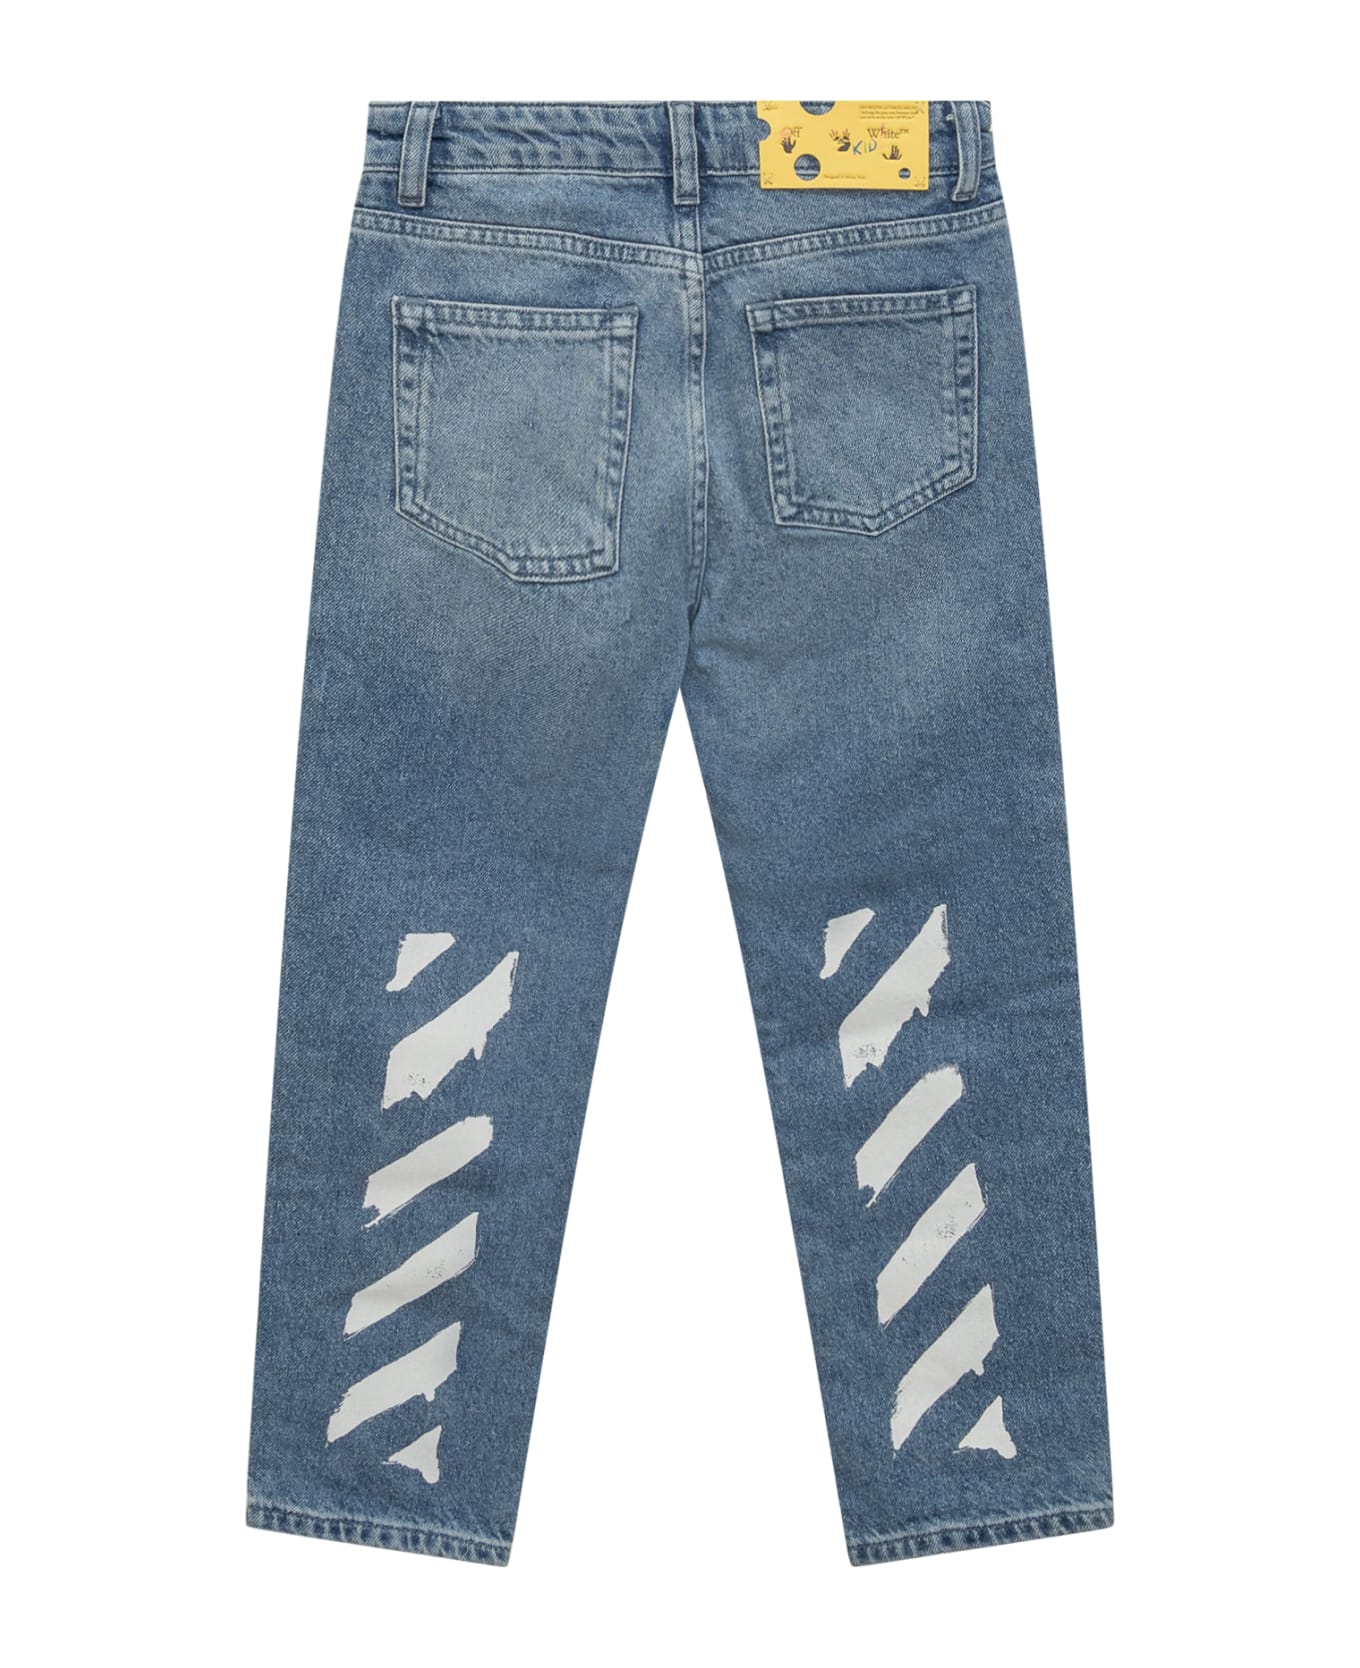 Off-White Paint Graphic Jeans - NAVY ボトムス